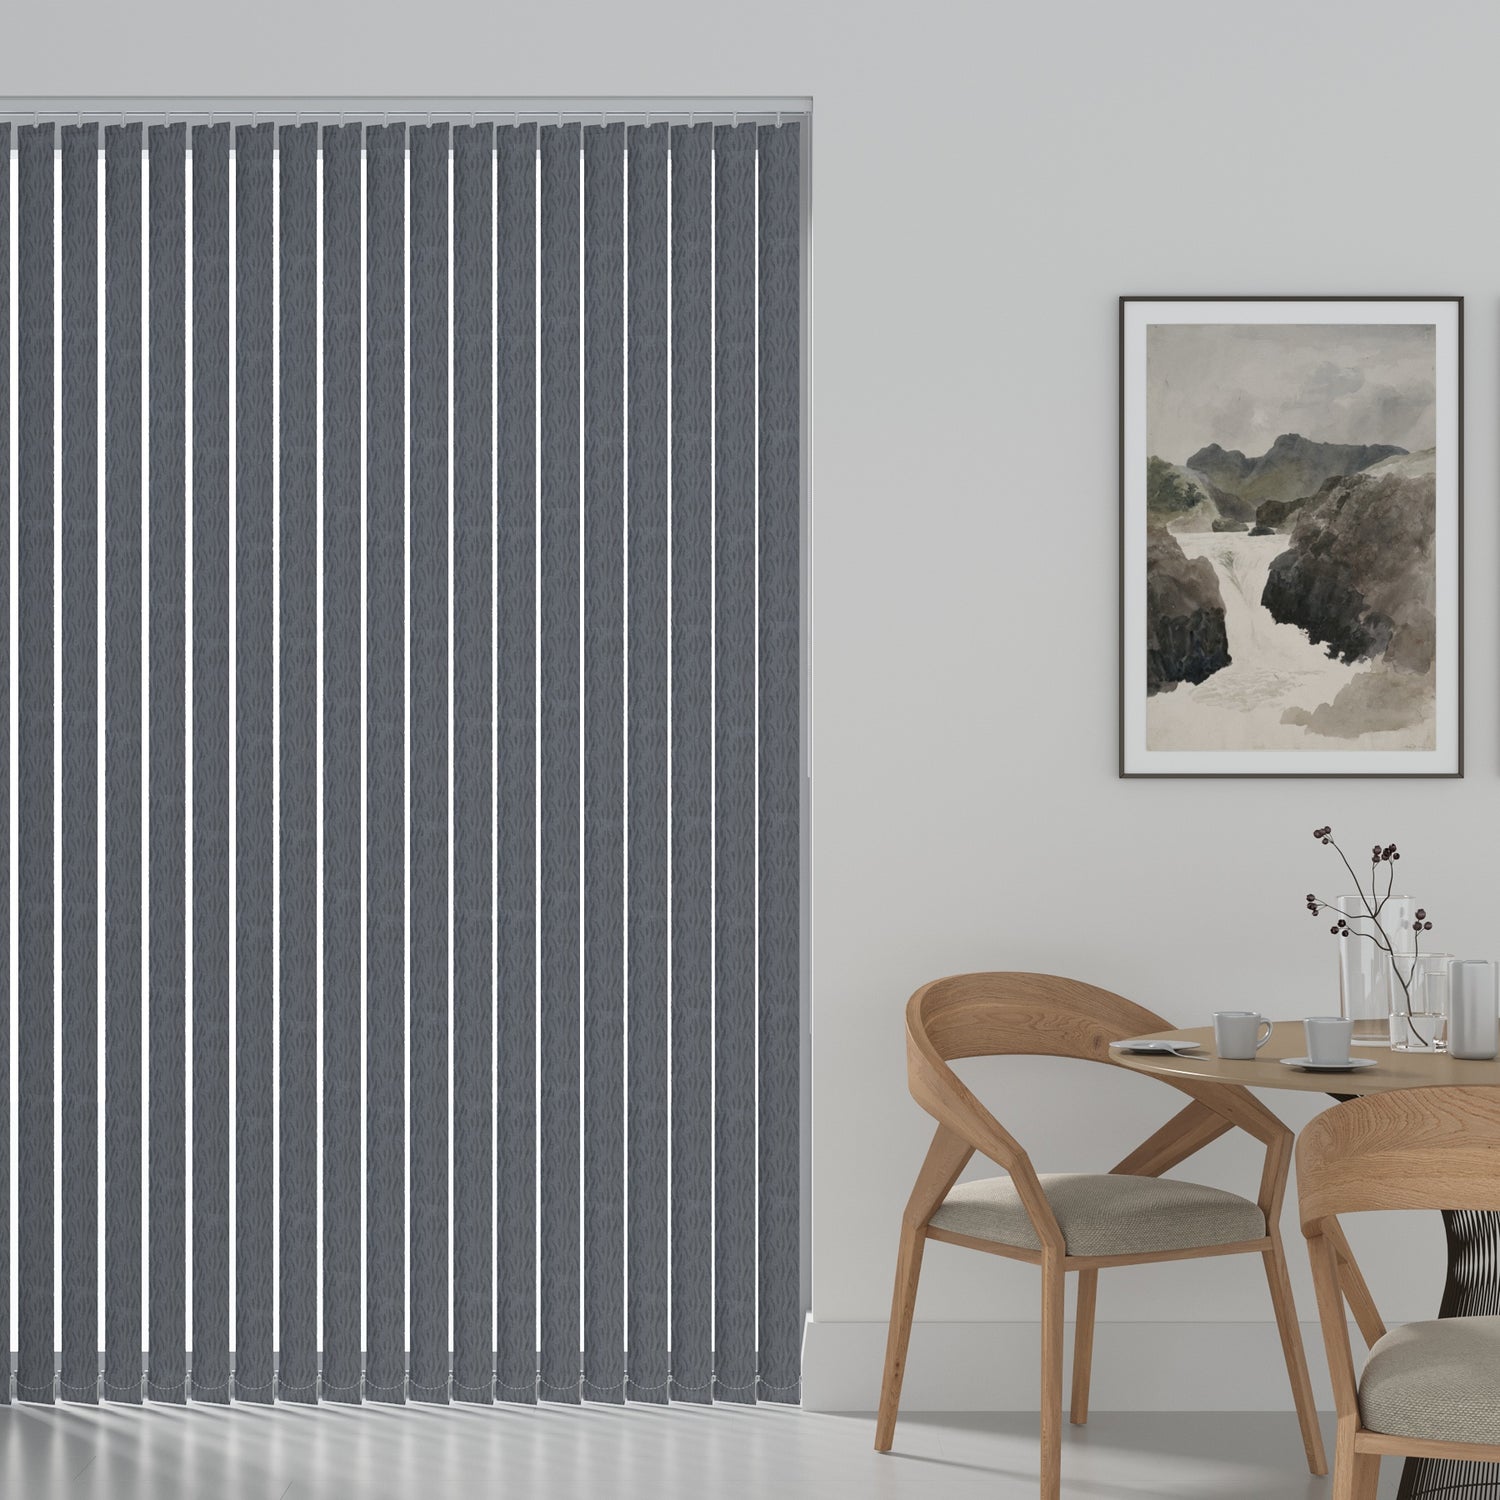 Oasis Charcoal - Grey Replacement Slats